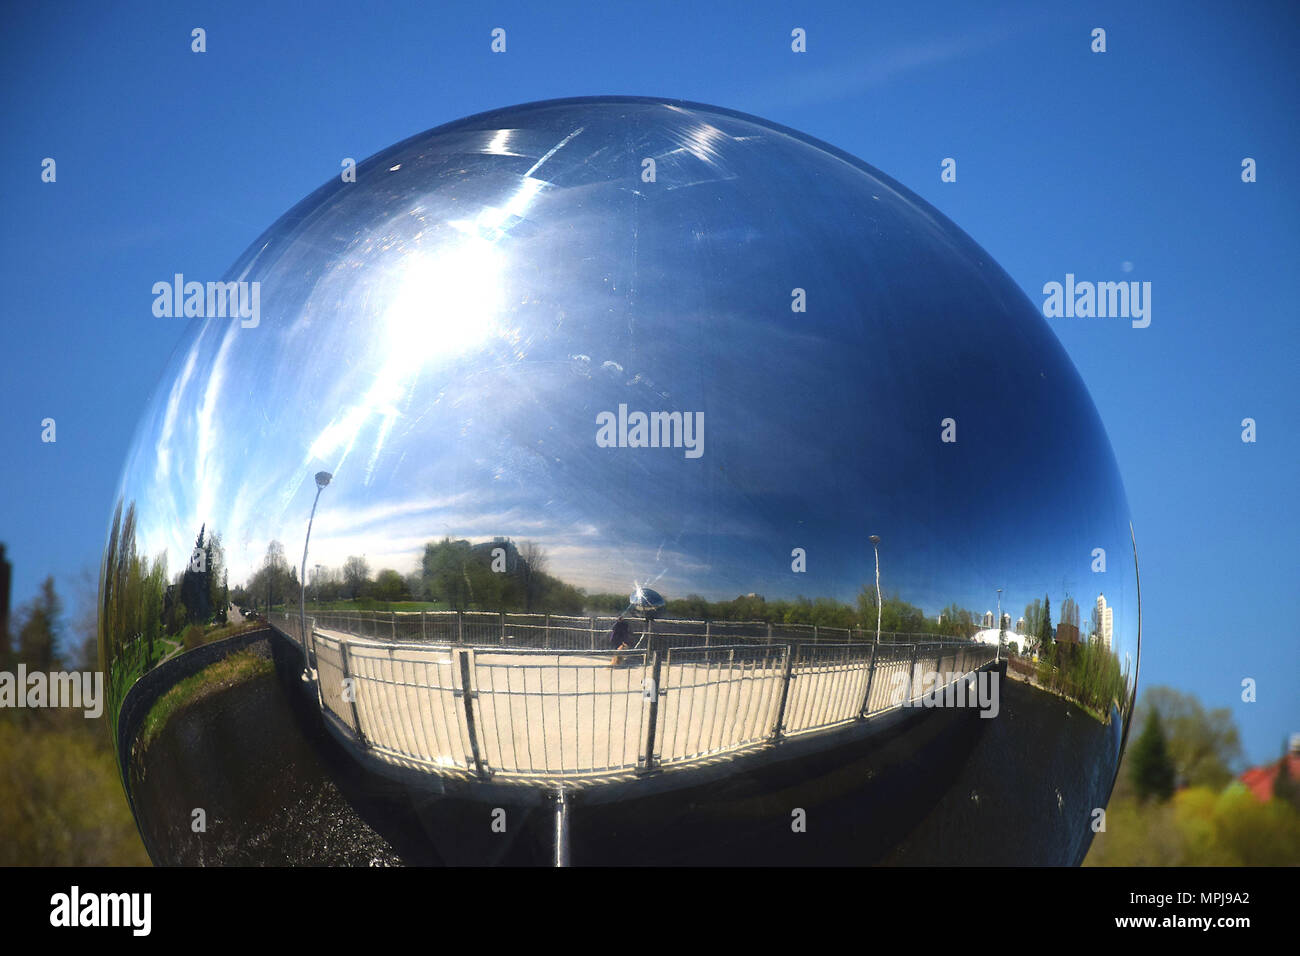 Reflection on a metal sphere Stock Photo